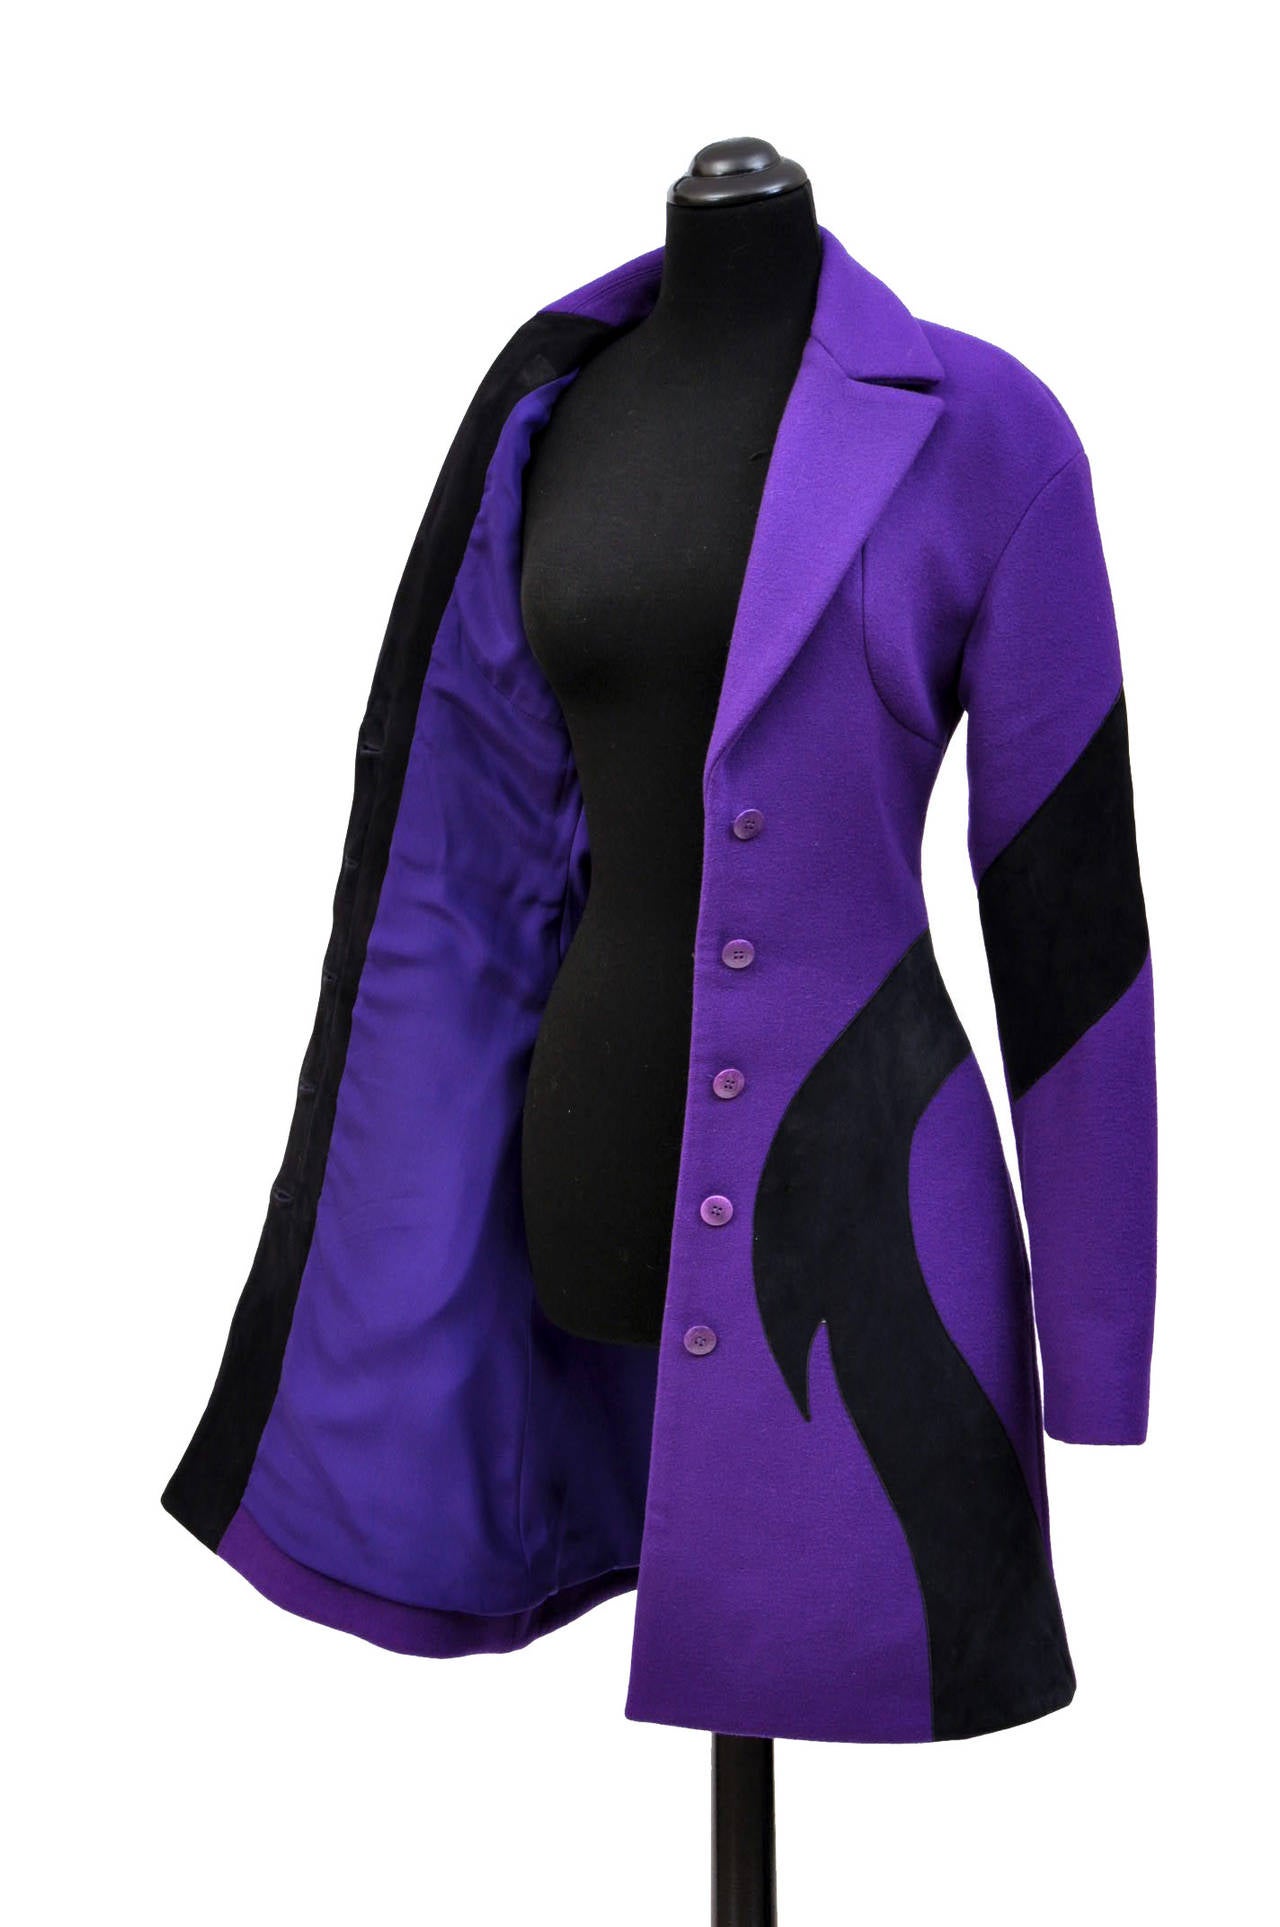 F/W 2011 look #20 NEW VERSACE VIOLET WOOL COAT with SUEDE 38 - 4 For Sale 3